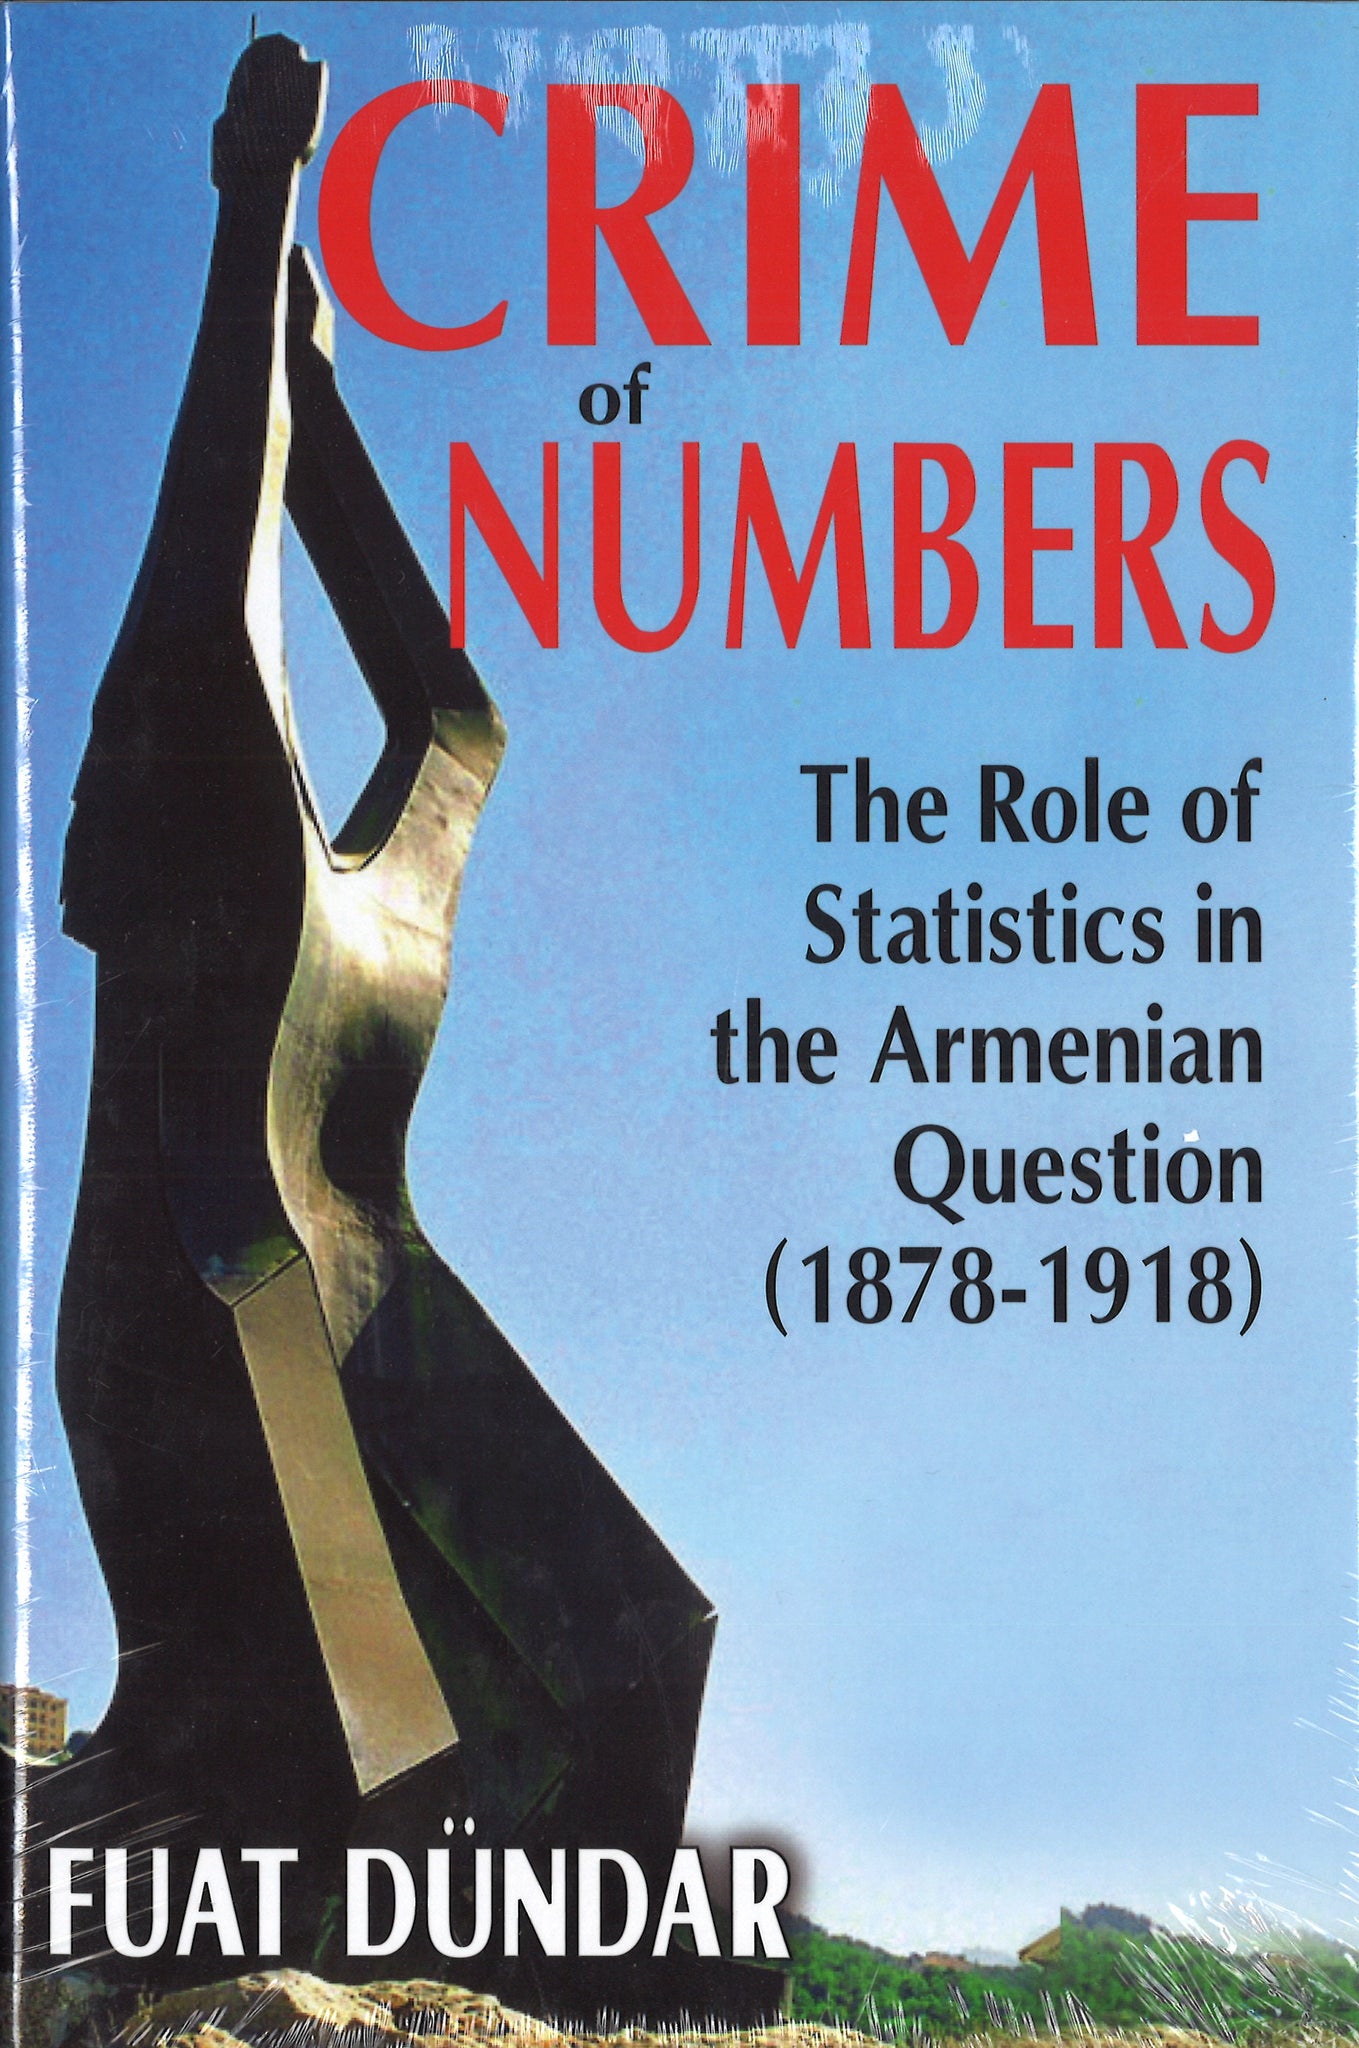 CRIME OF NUMBERS: The Role of Statistics in the Armenian Question (1878-1918)